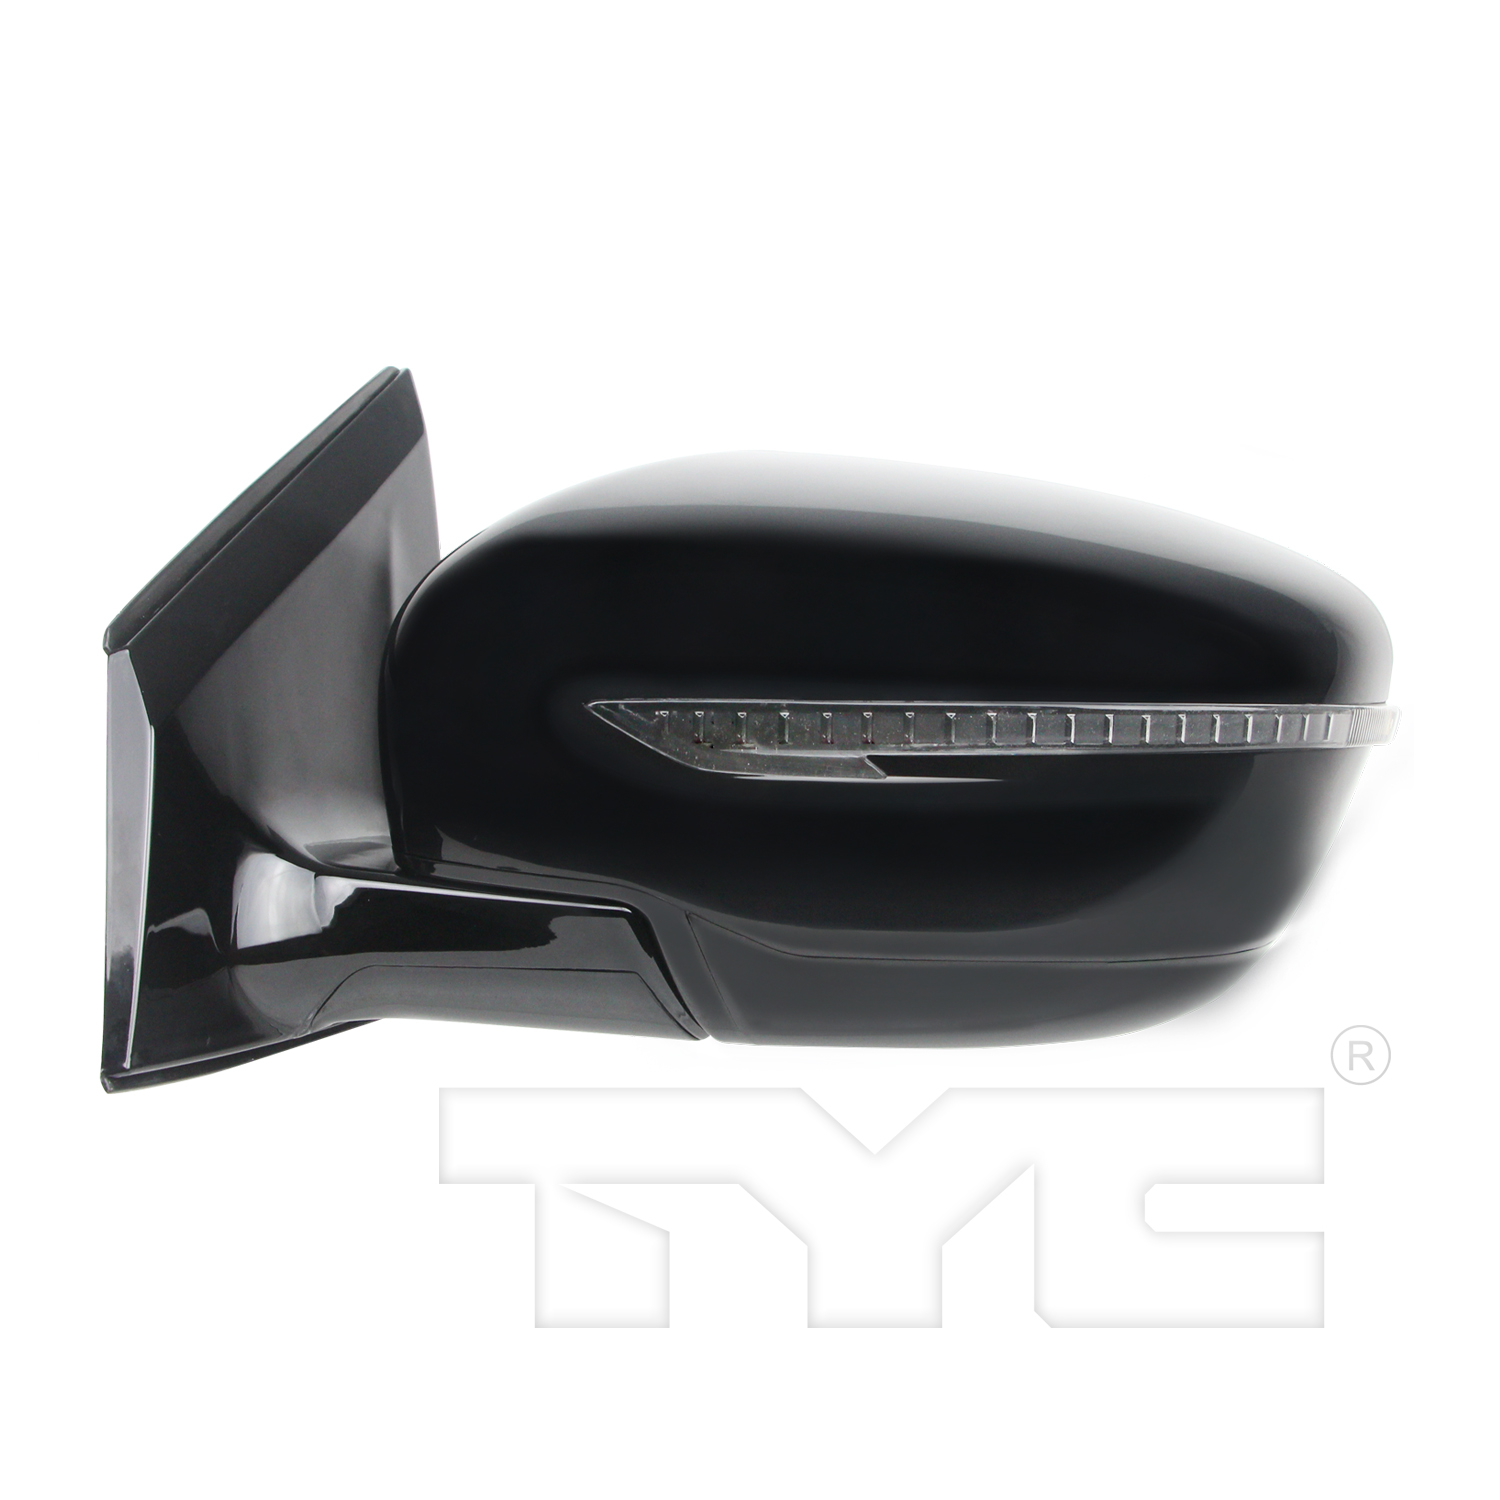 Aftermarket MIRRORS for NISSAN - MURANO, MURANO,15-15,LT Mirror outside rear view